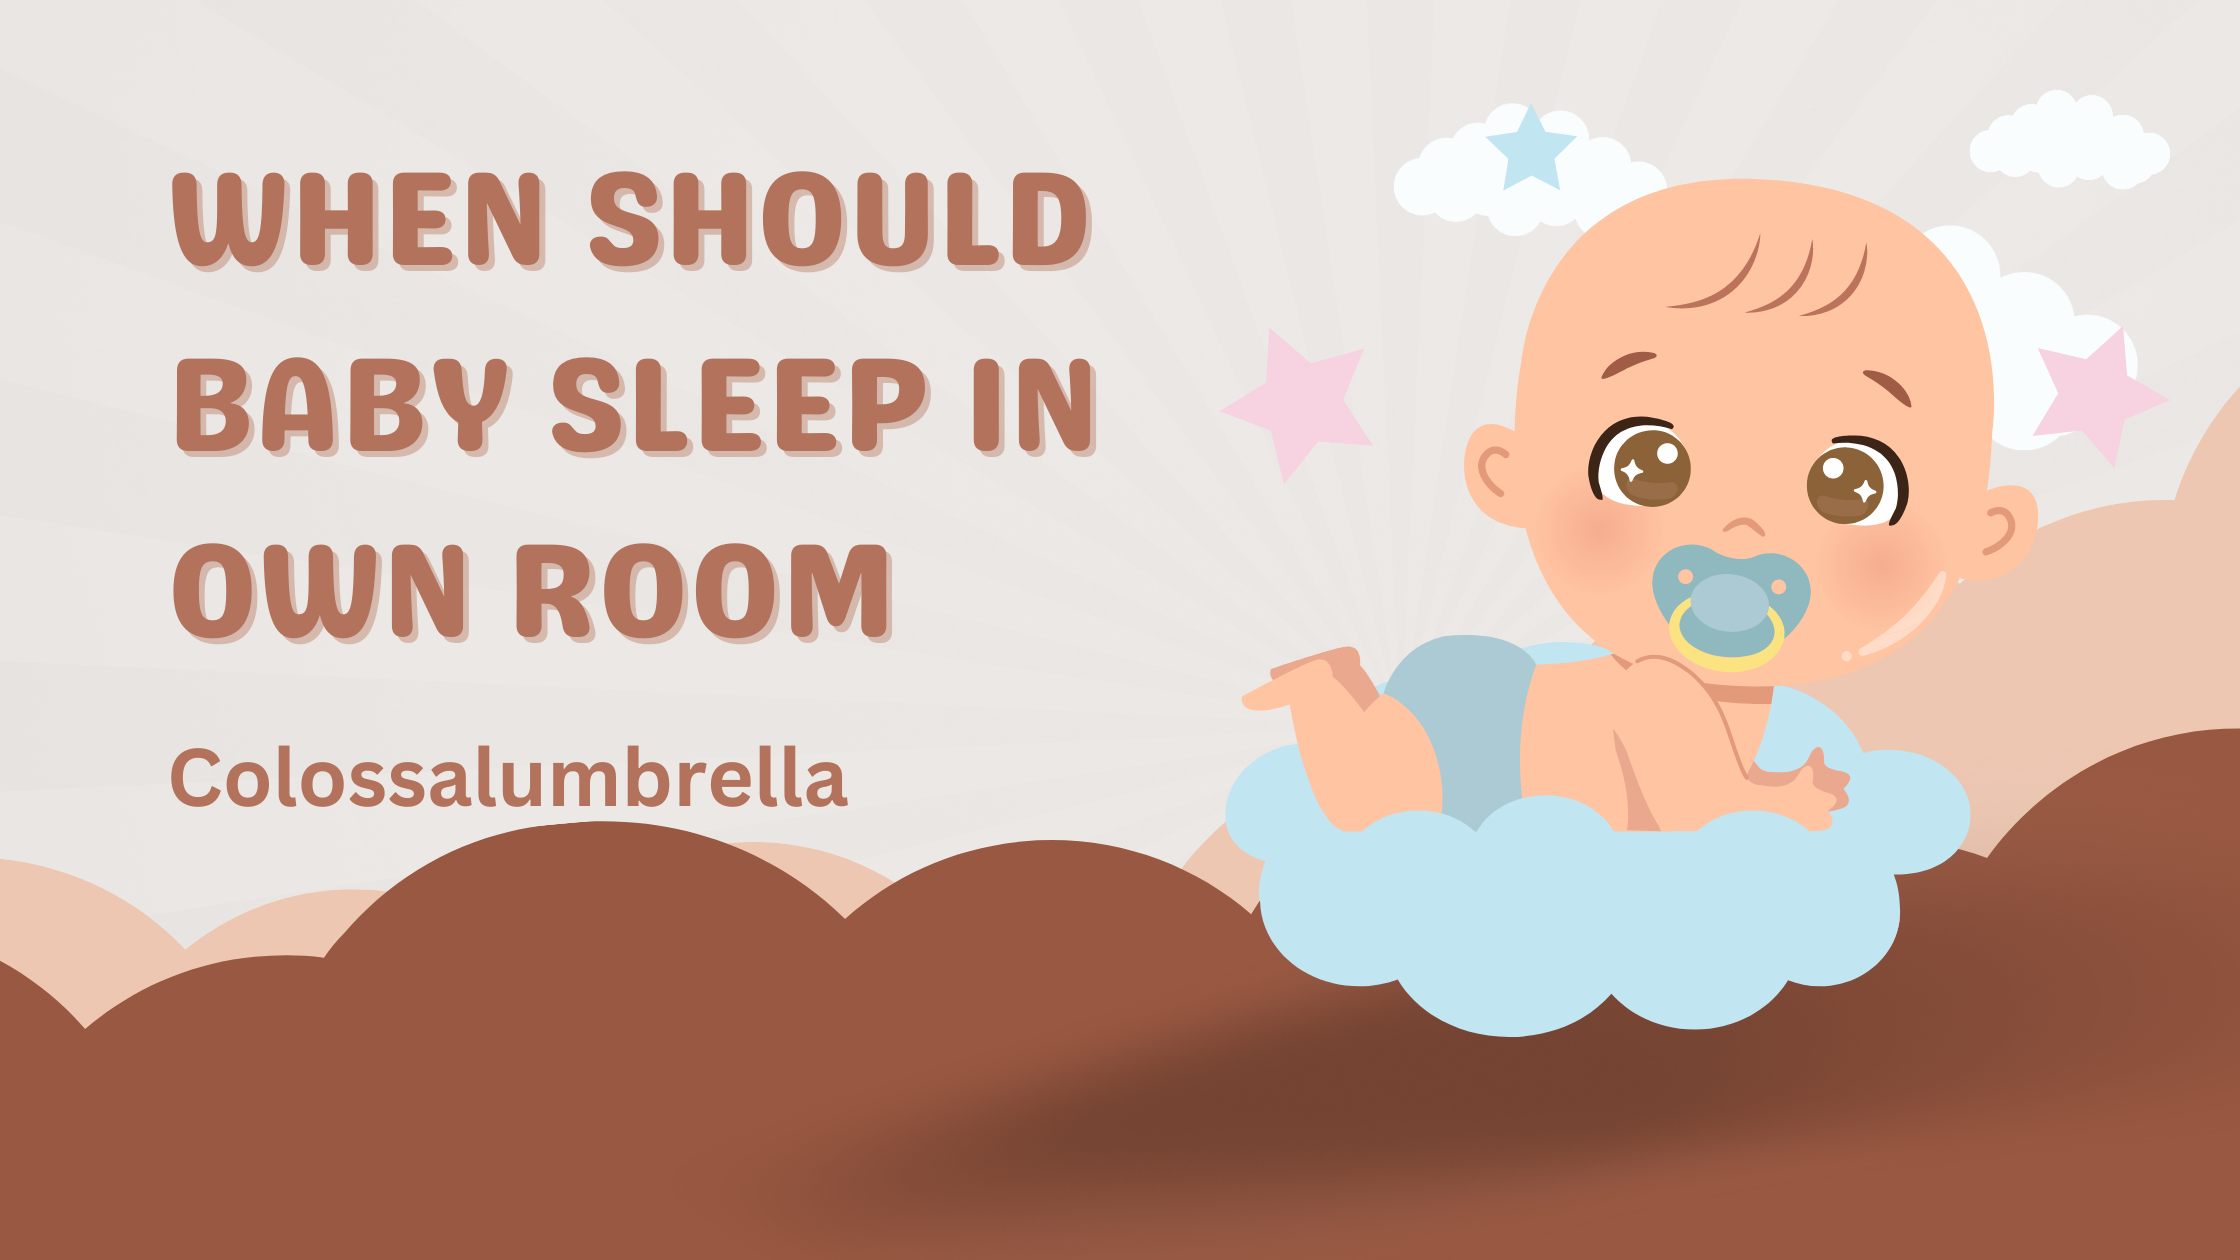 when should baby sleep in own room - Tips to help baby Transition By Colossalumbrella